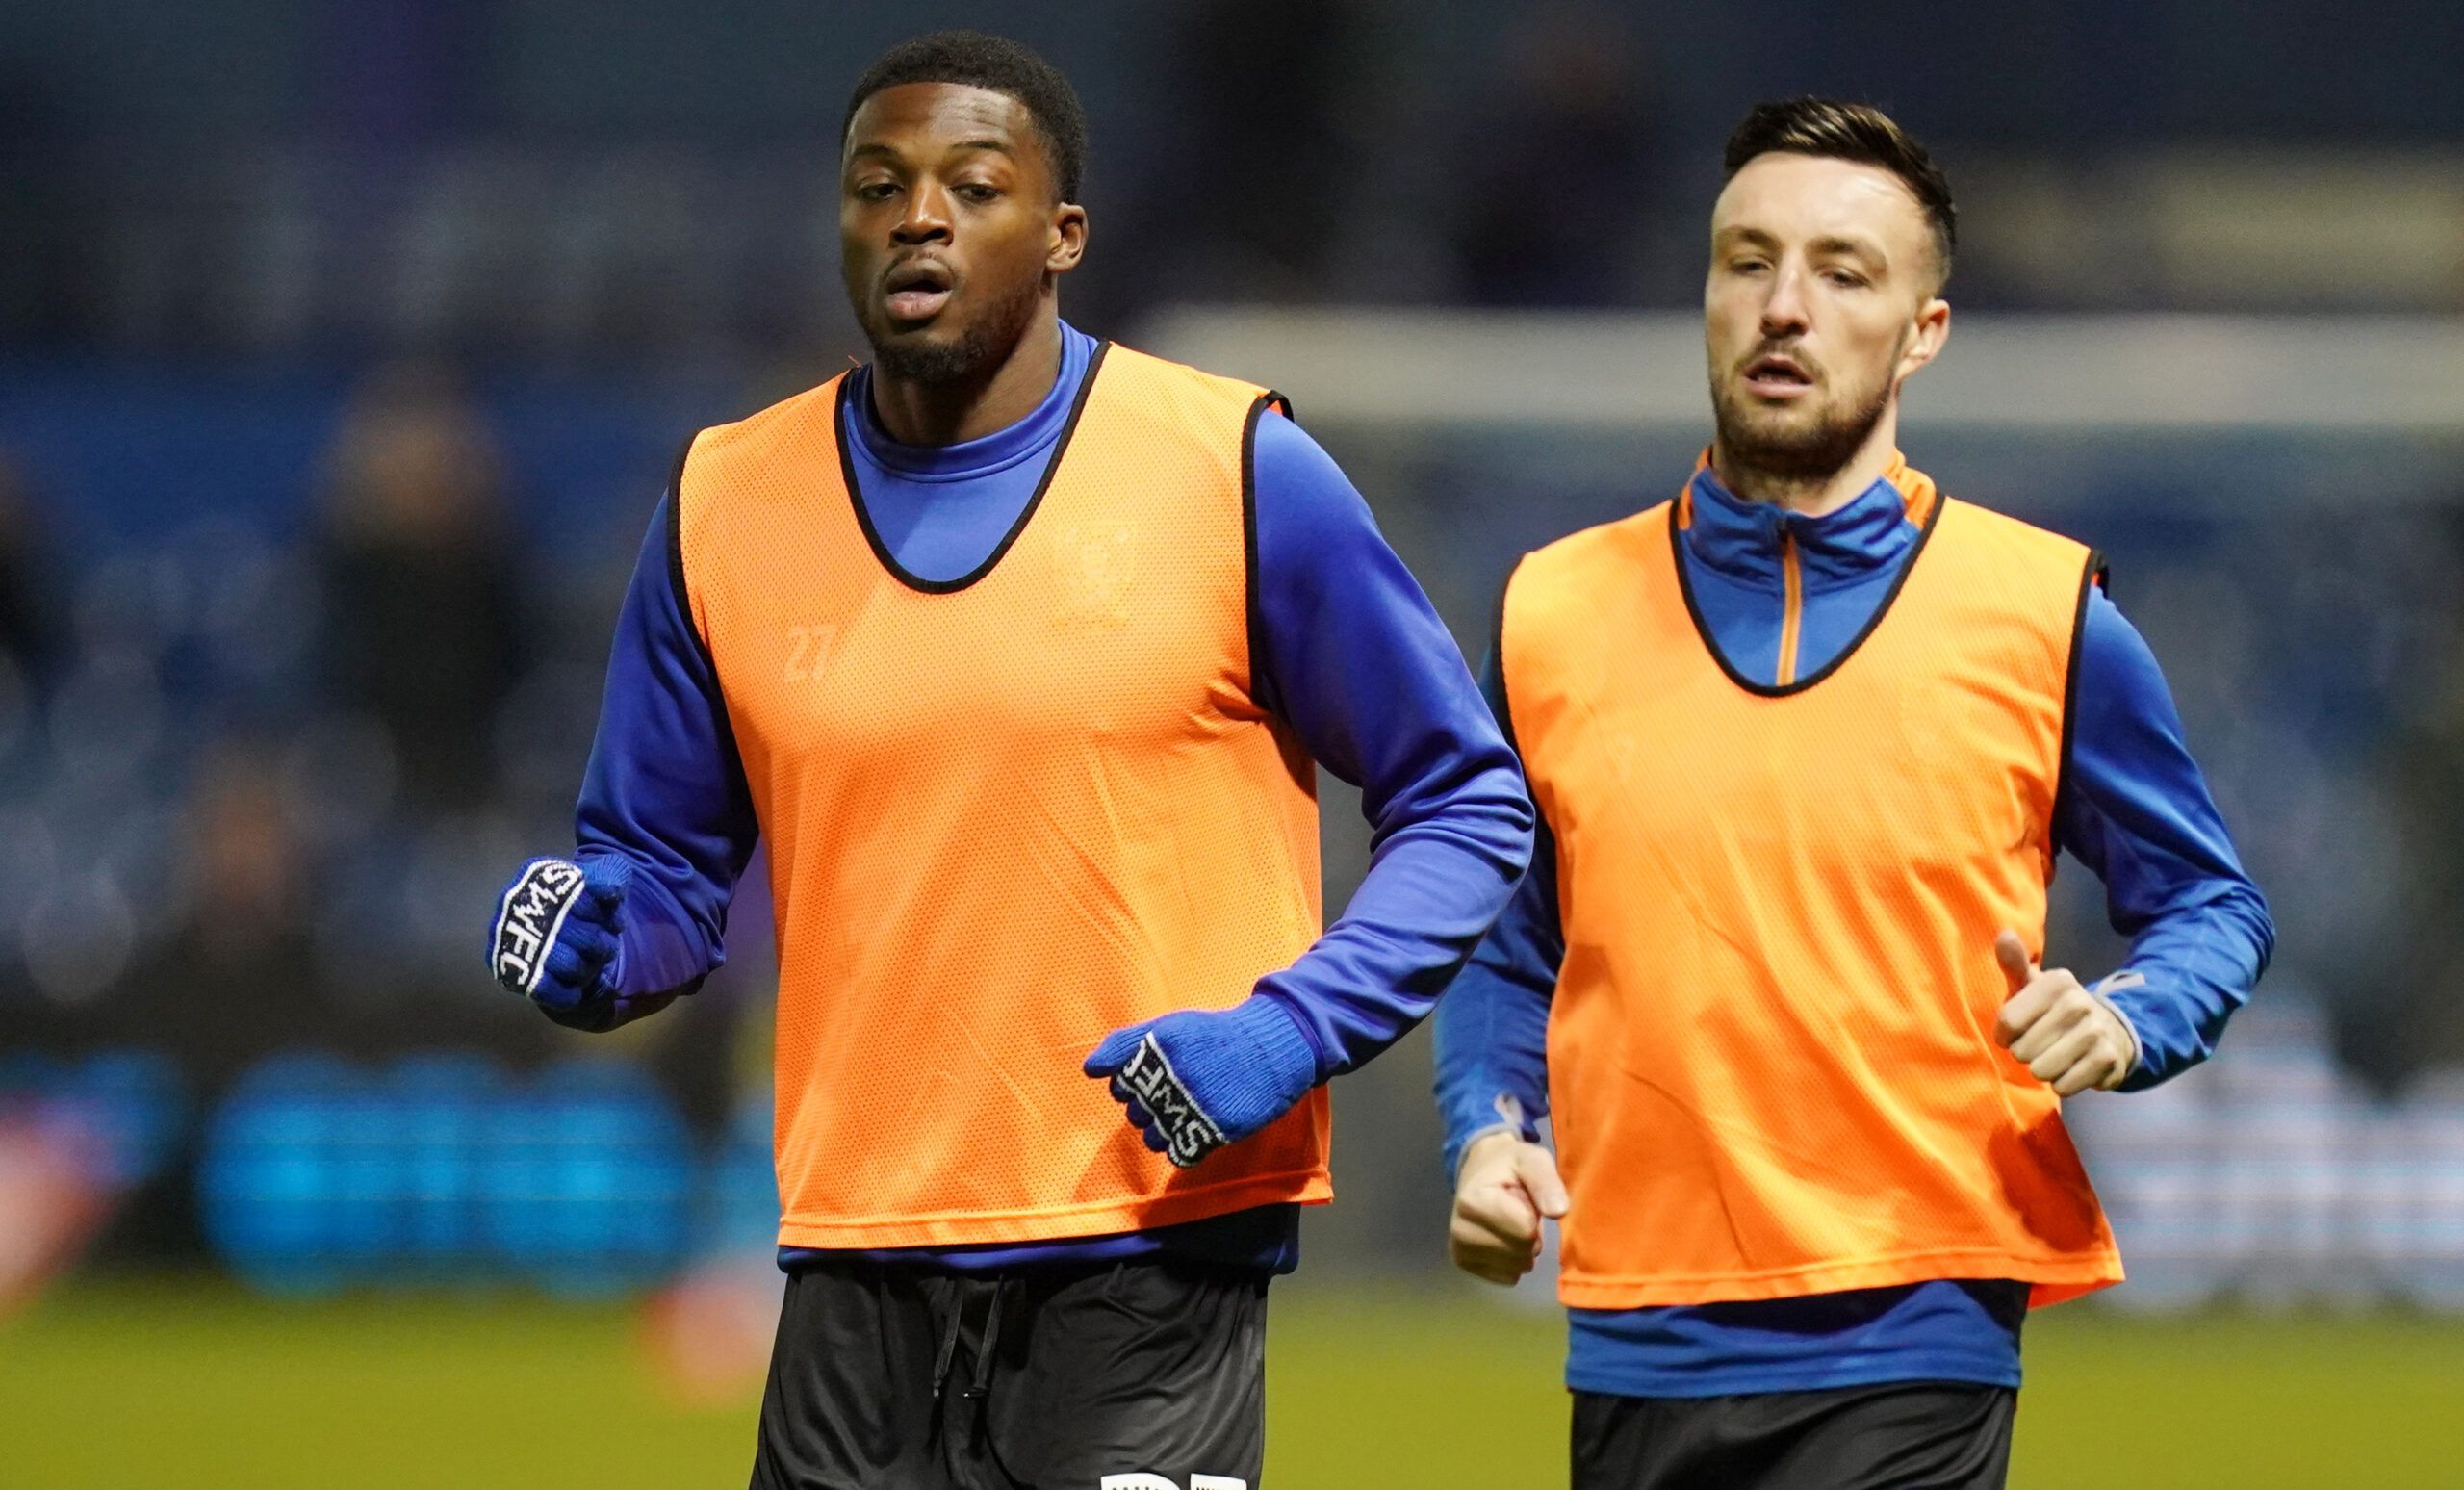 Soccer Football - FA Cup Fifth Round - Sheffield Wednesday v Manchester City - Hillsborough, Sheffield, Britain - March 4, 2020  Sheffield Wednesday's Dominic Iorfa and Morgan Fox during the warm up before the match      REUTERS/Jon Super